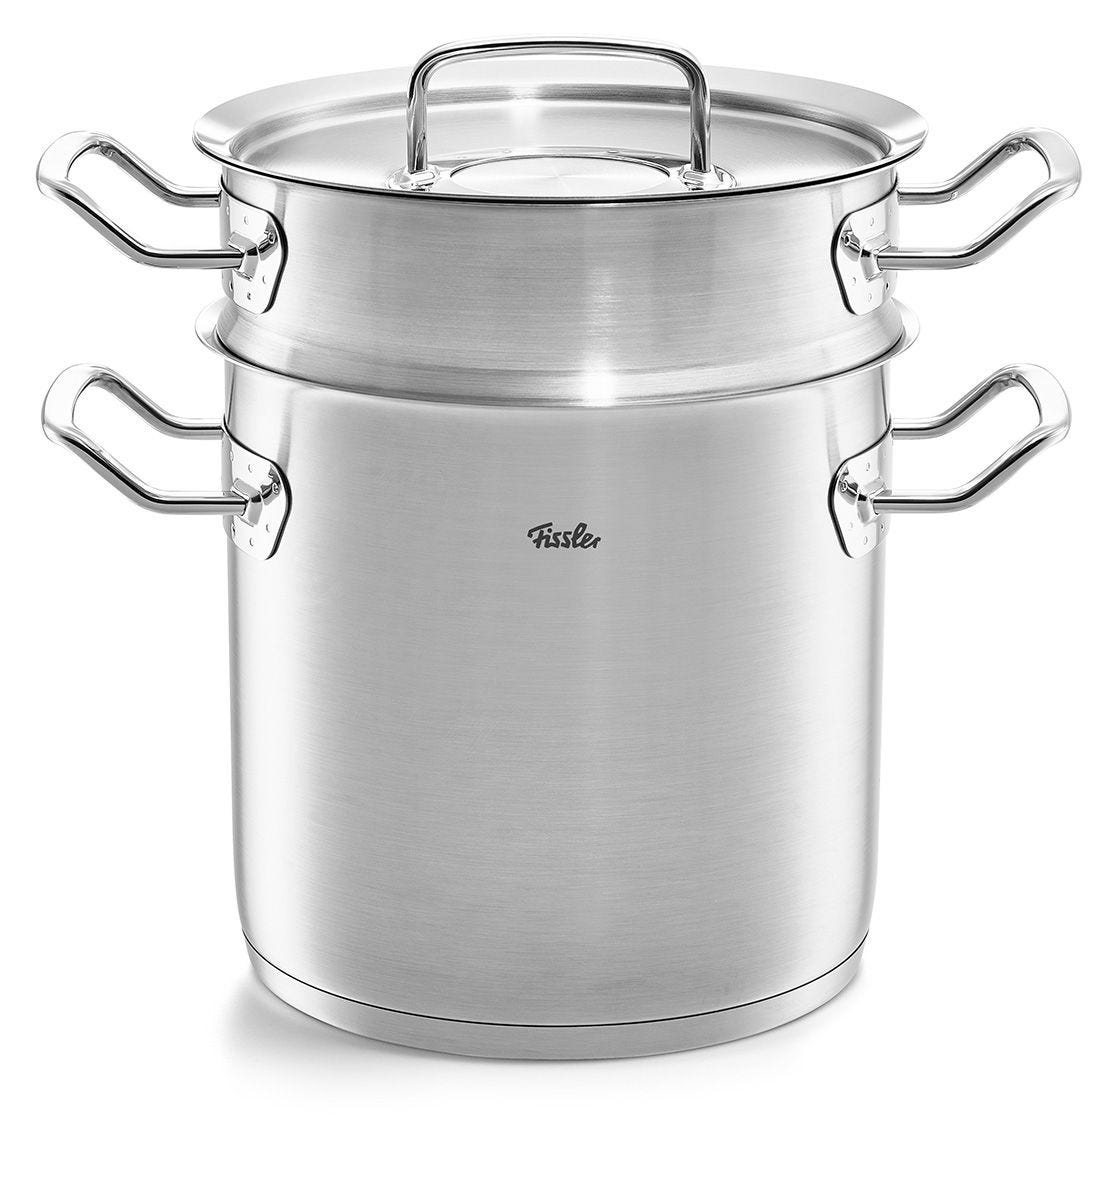 Original-Profi Collection® Stainless Steel Multipot with Steamer, 6.4 Quart